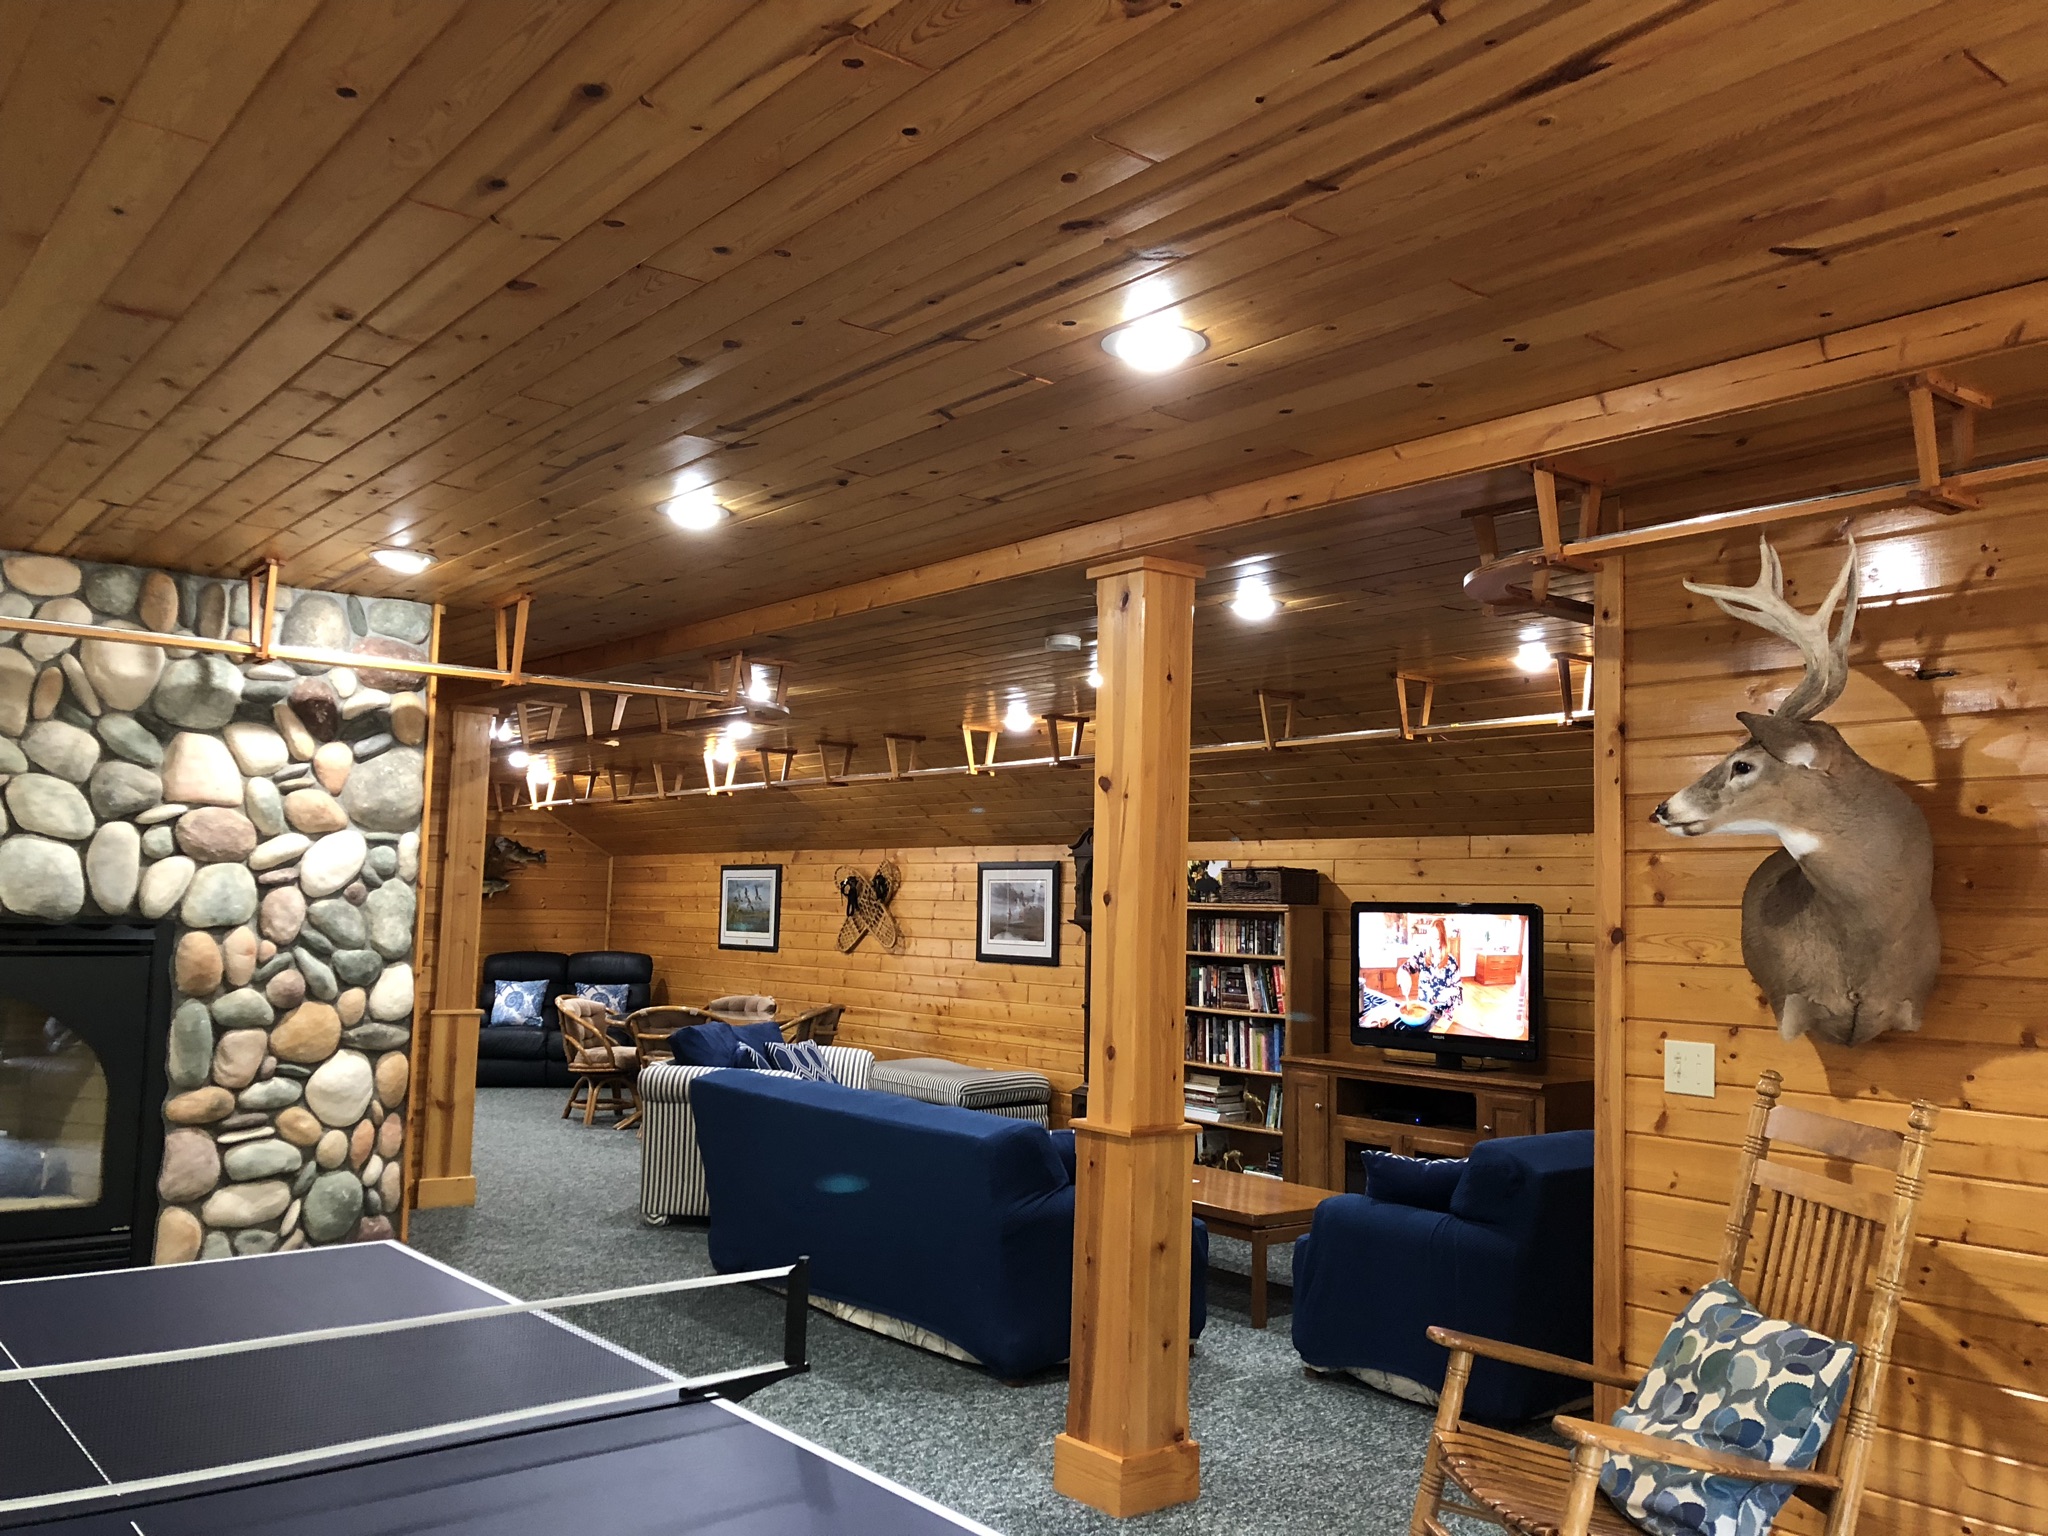 Seating area with cable TV at Torch Lake Lodge. All areas have high speed internet.